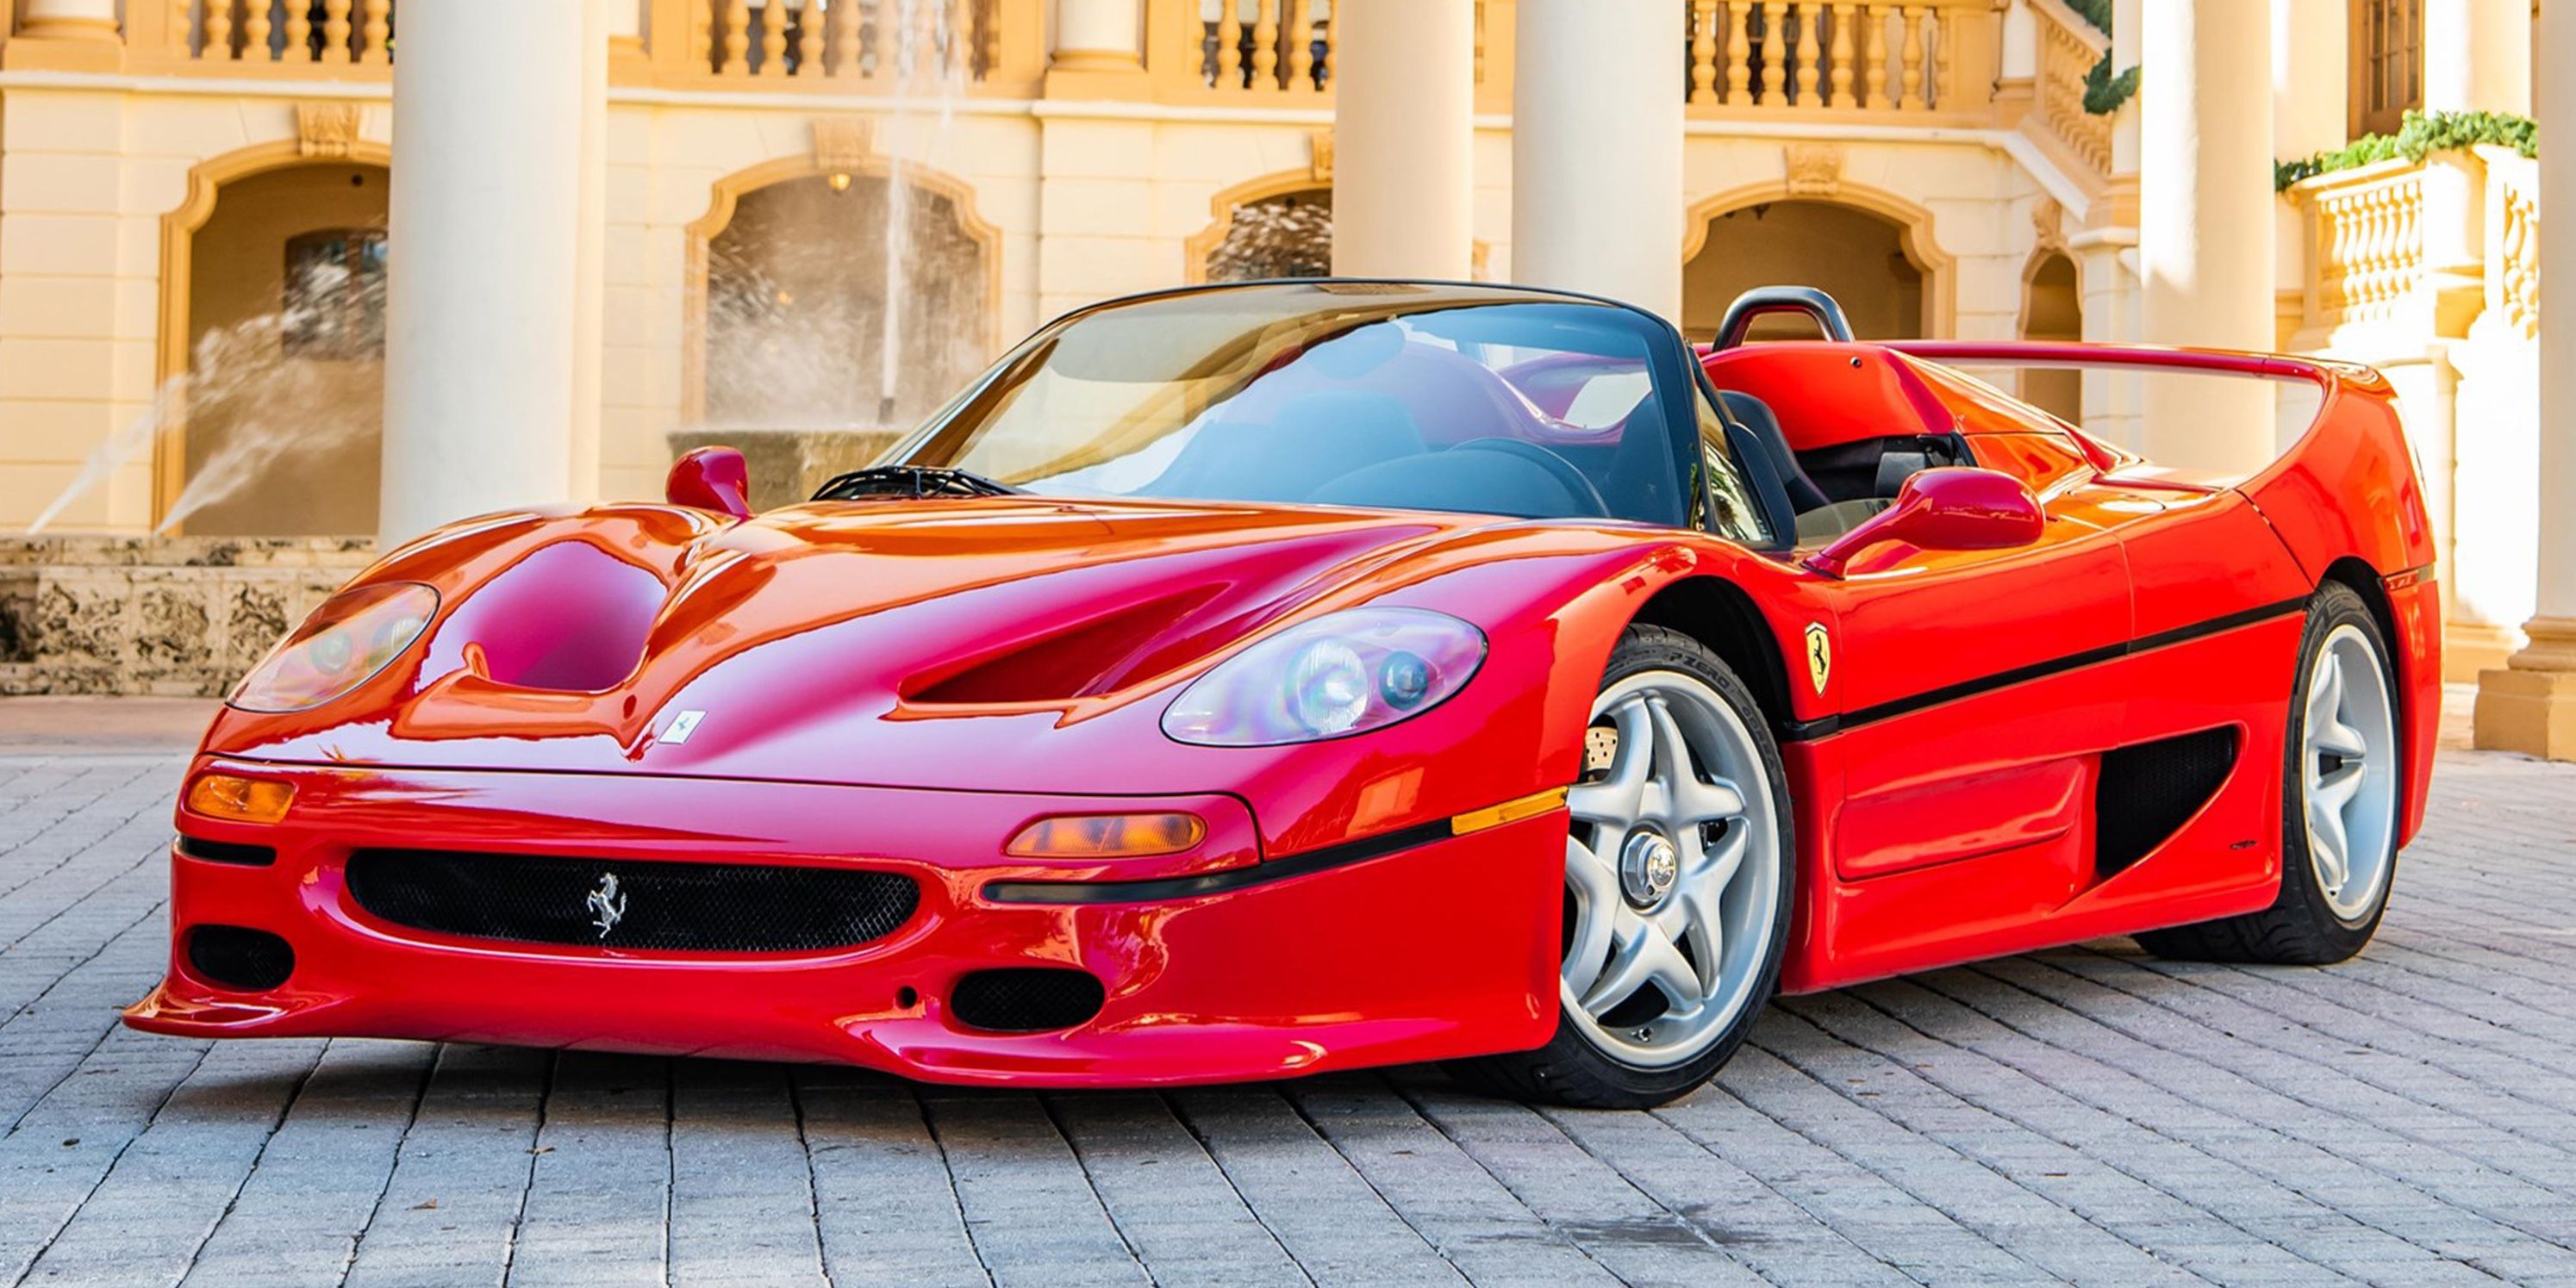 A ravishing red 1995 Ferrari F50 parked on a cobbled ground